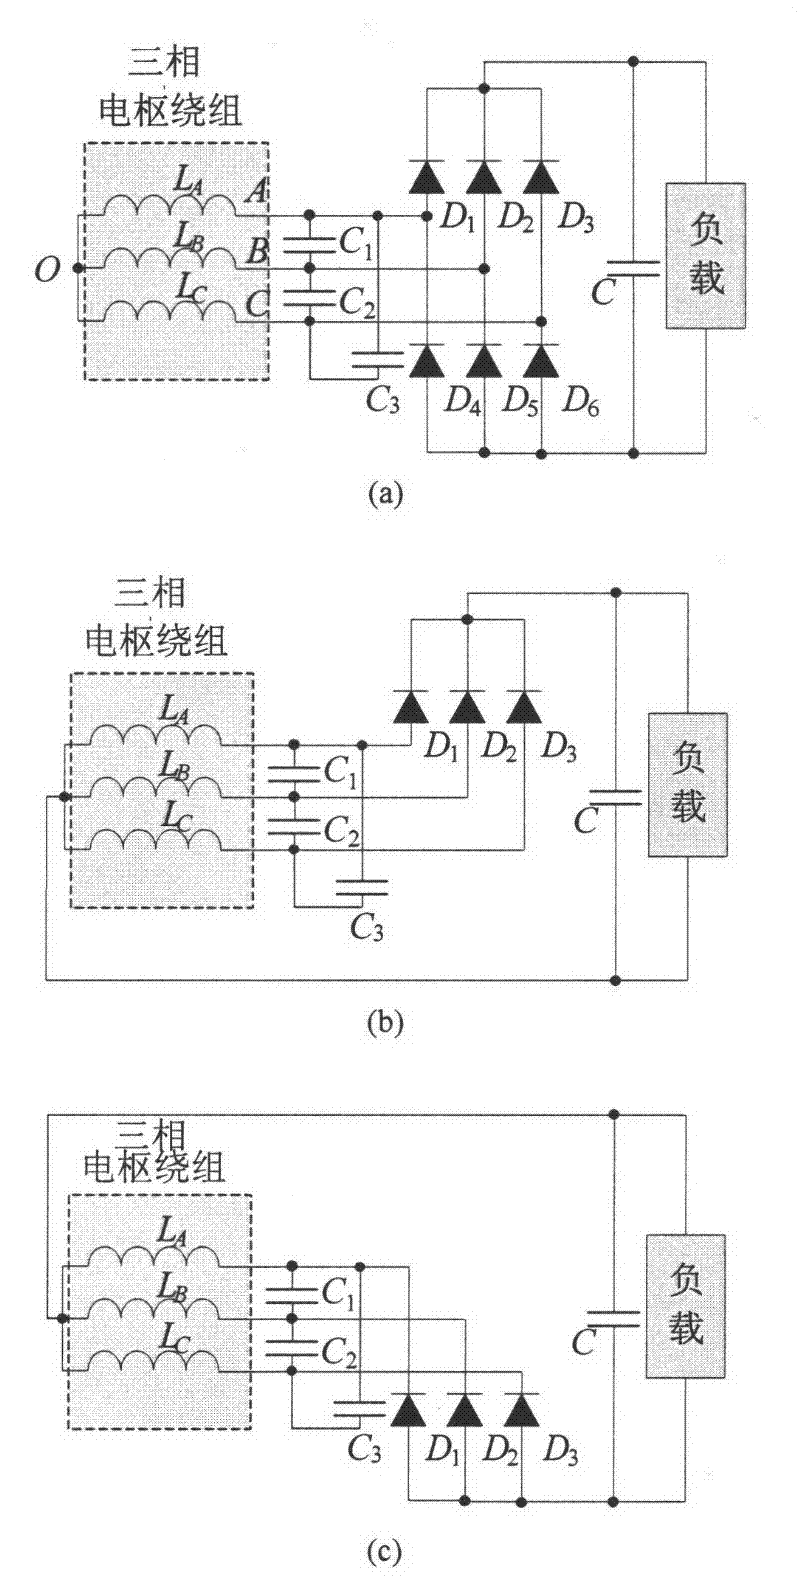 Capacitance compensation circuit structure applied to doubly salient DC generator